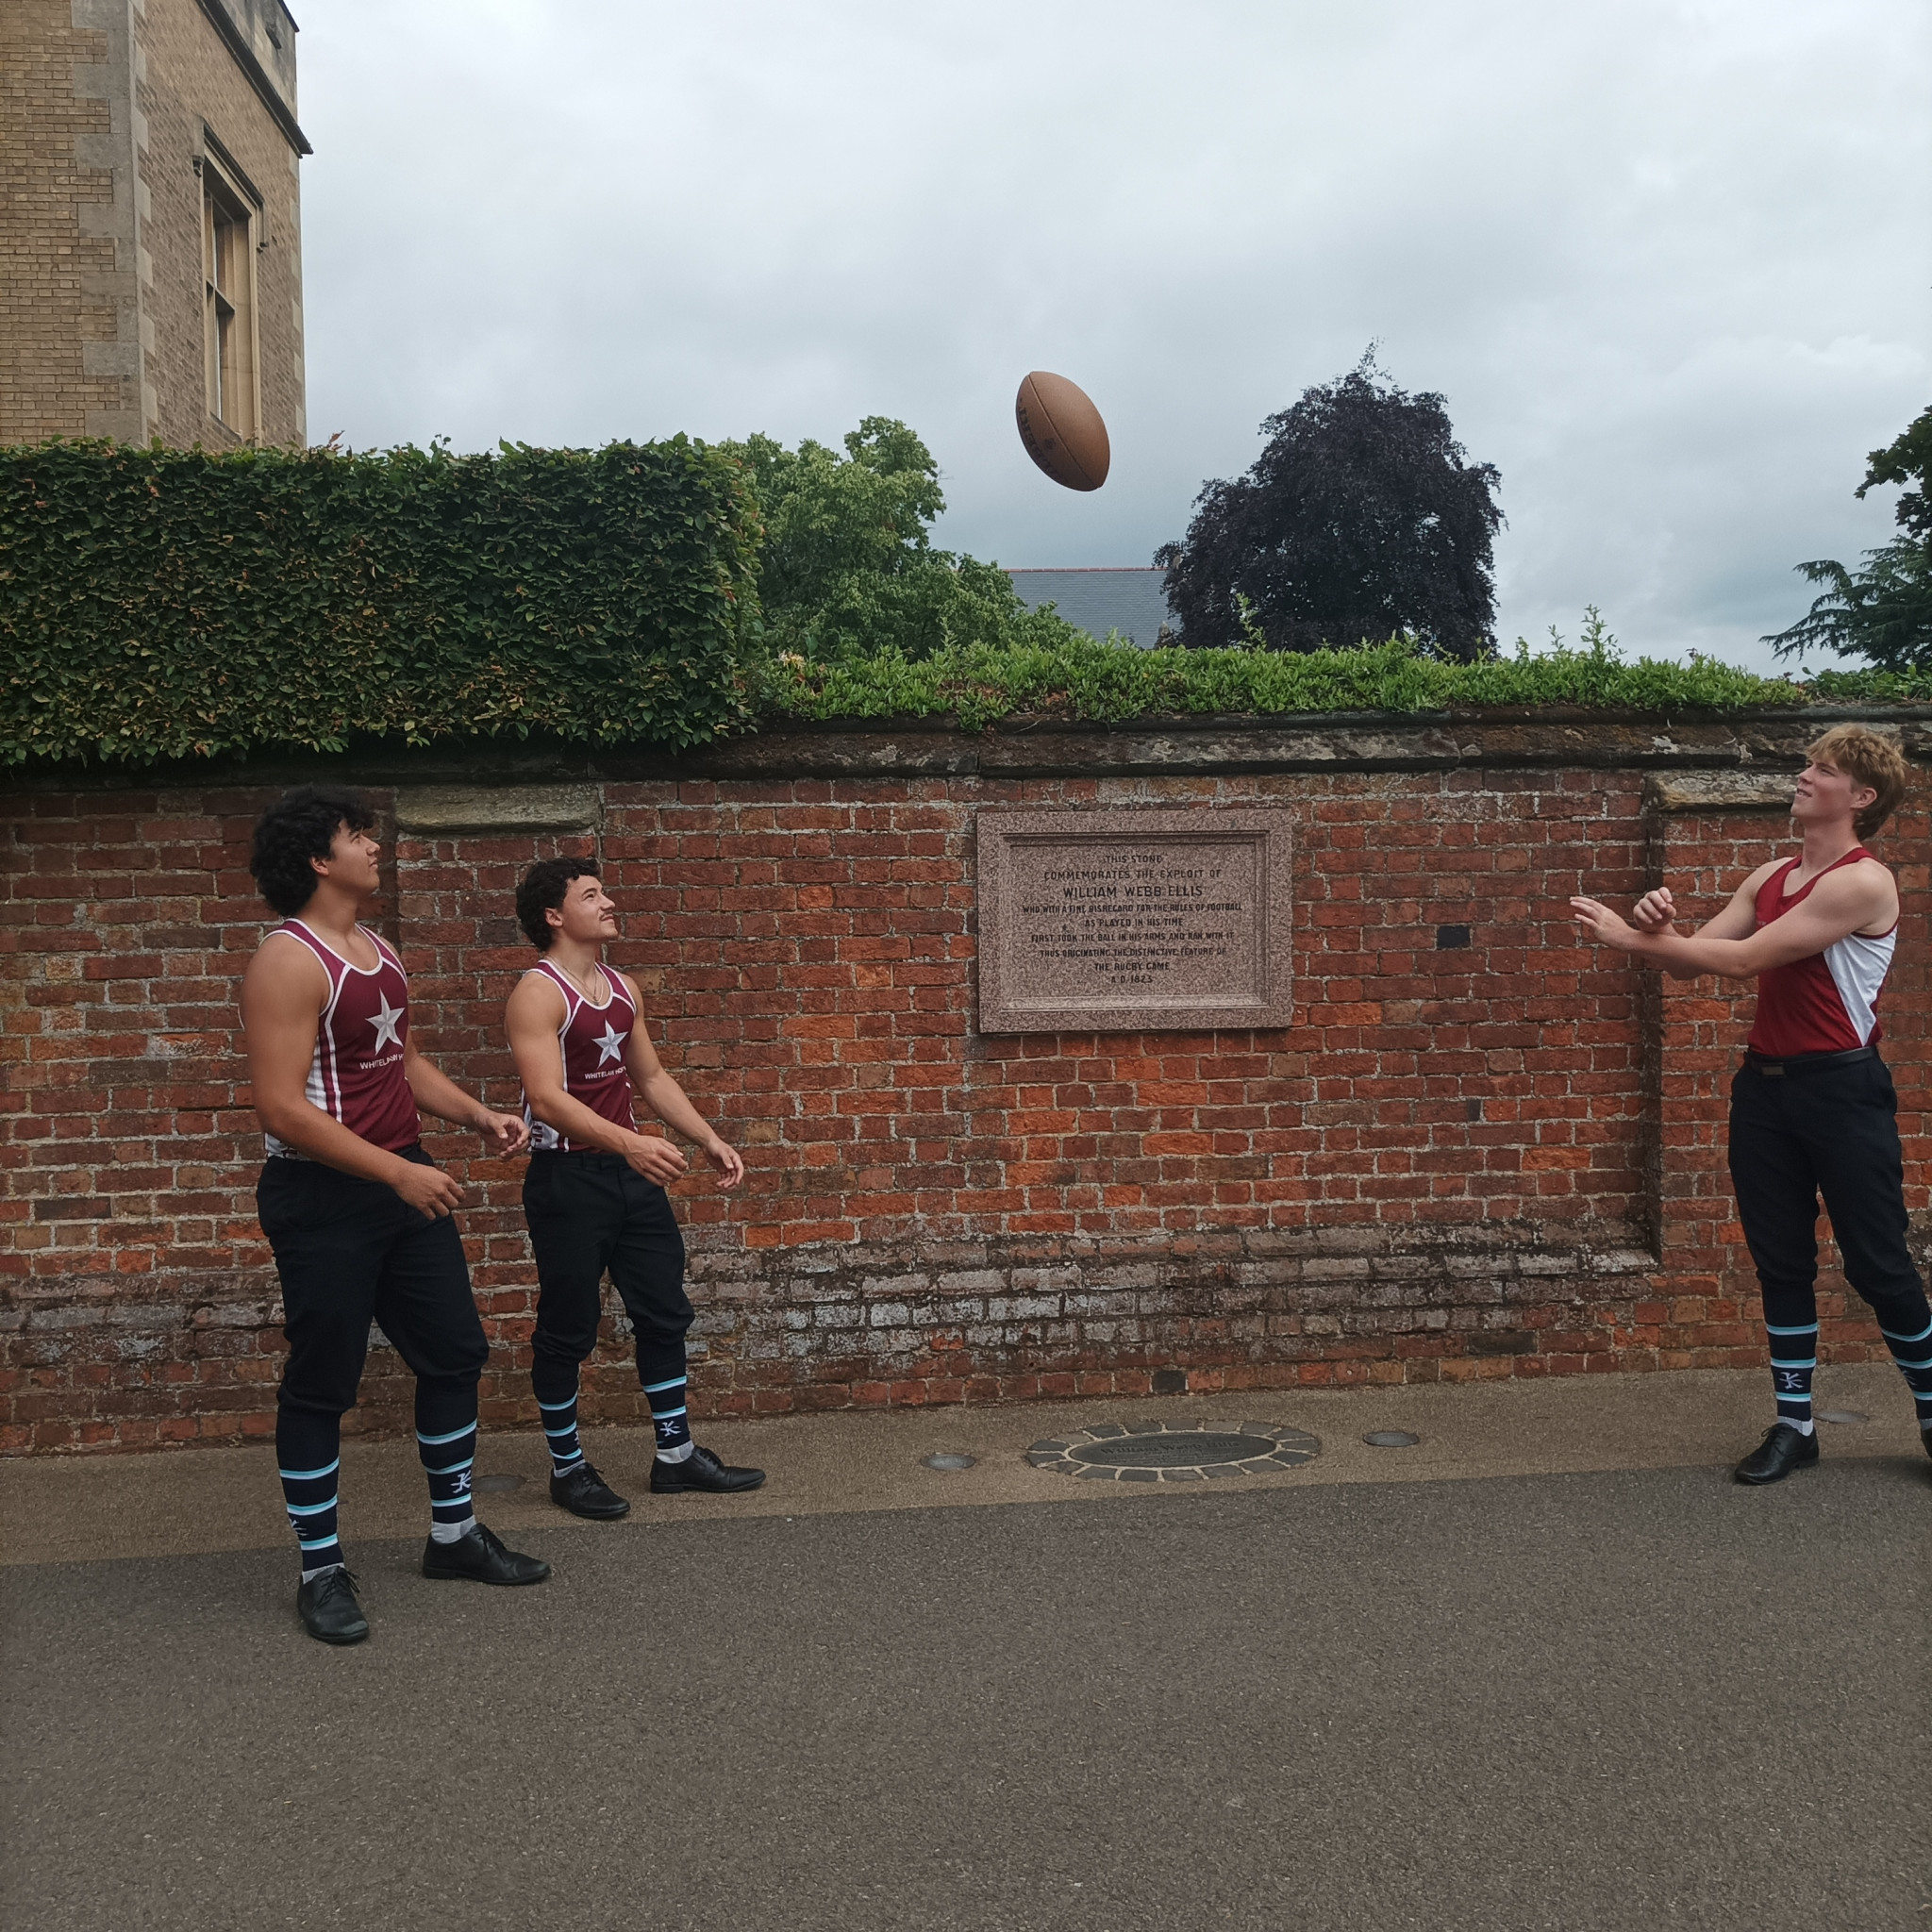 Pupils throw a rugby ball in front of tablet honouring William Webb Ellis at Rugby School ©ITG